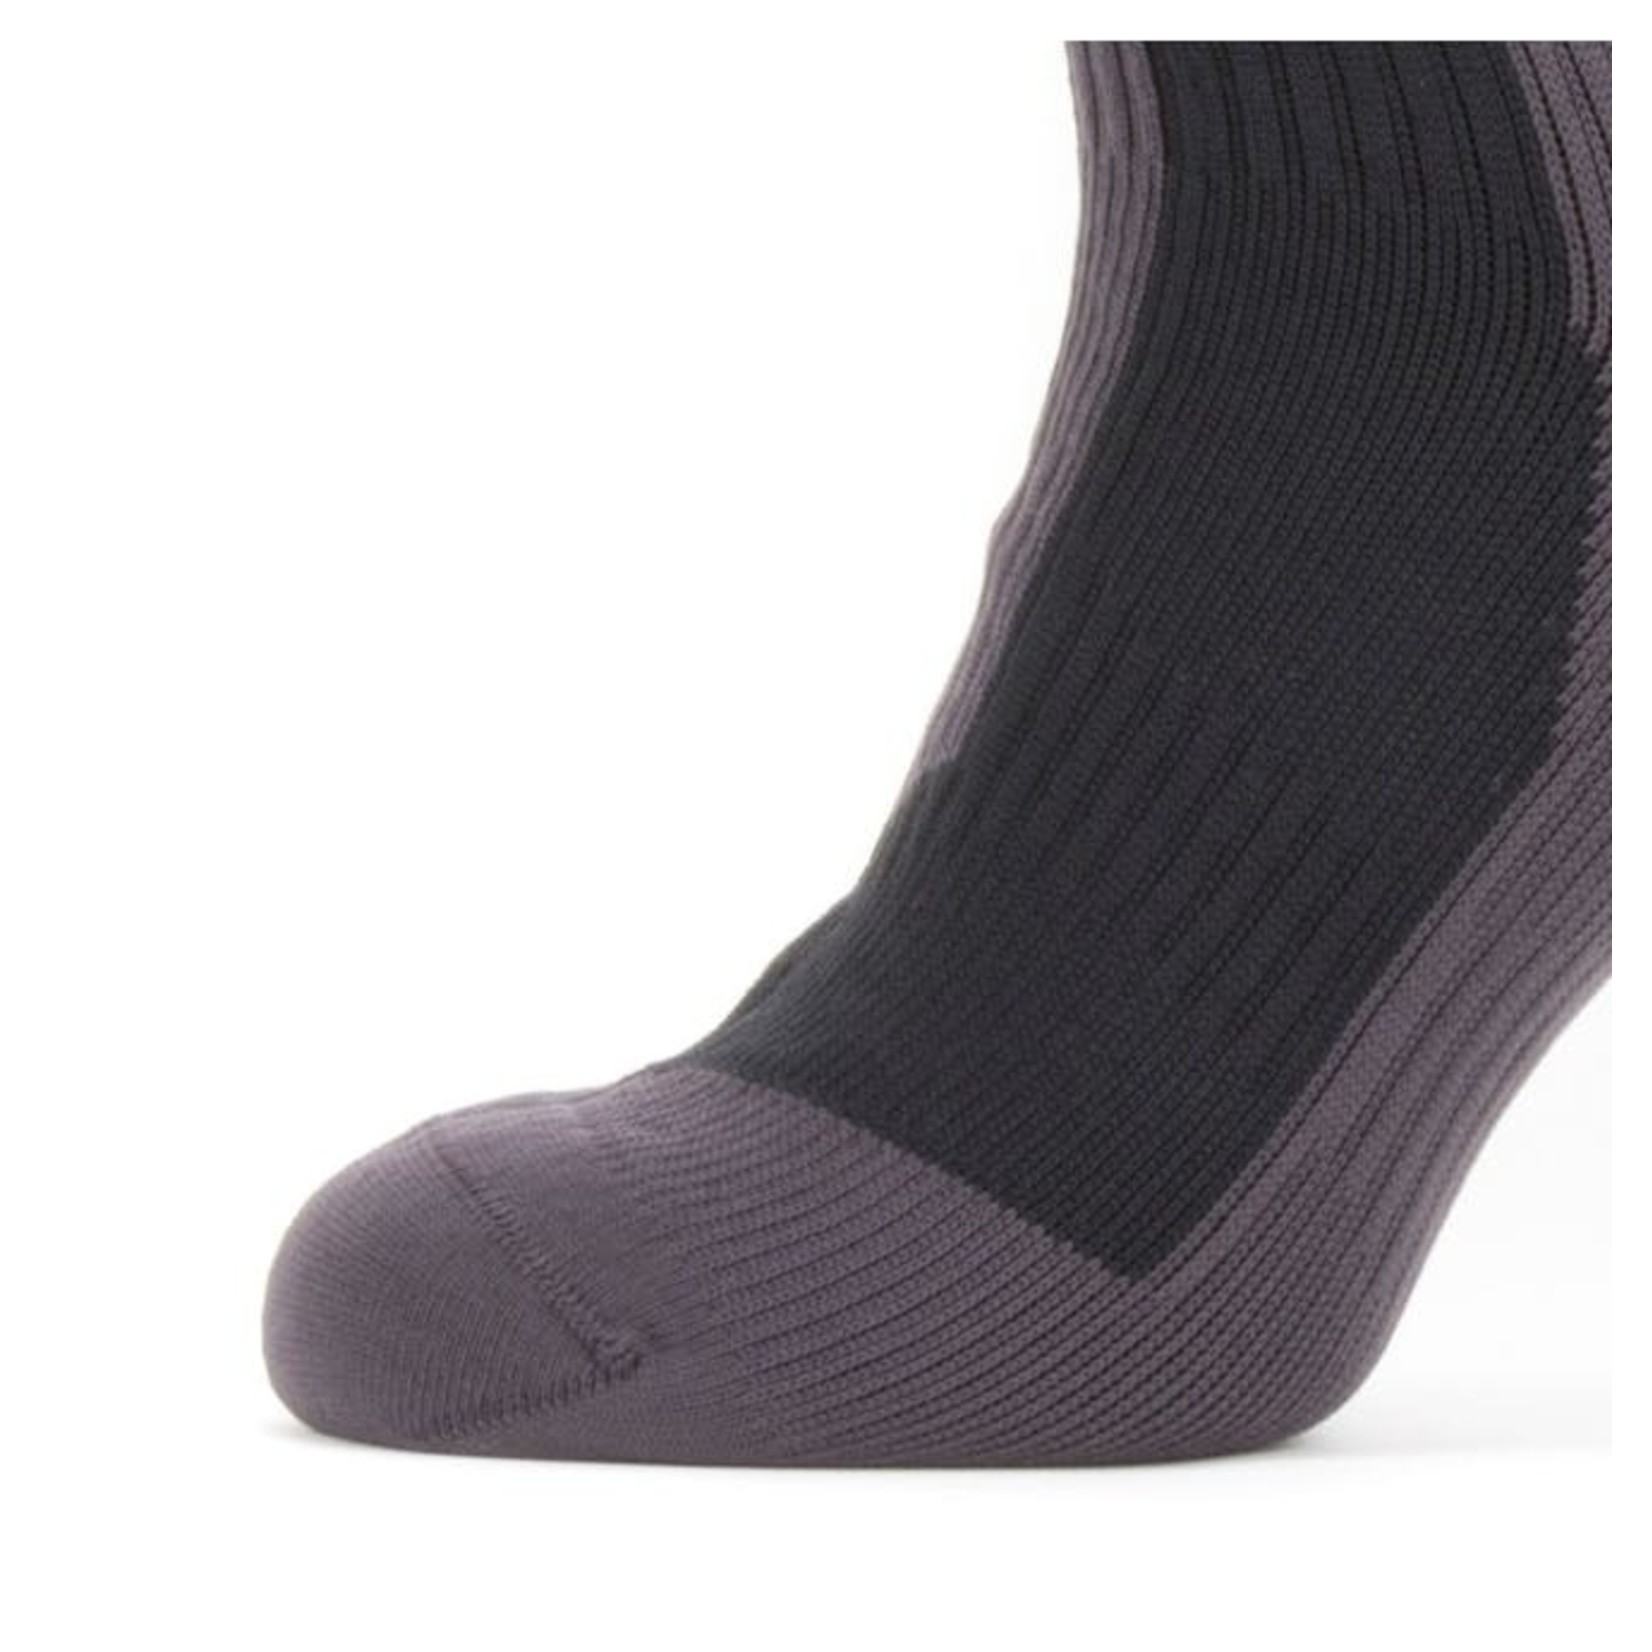 SealSkinz SealSkinz Waterproof Extreme Cold Weather Mid Length Sock